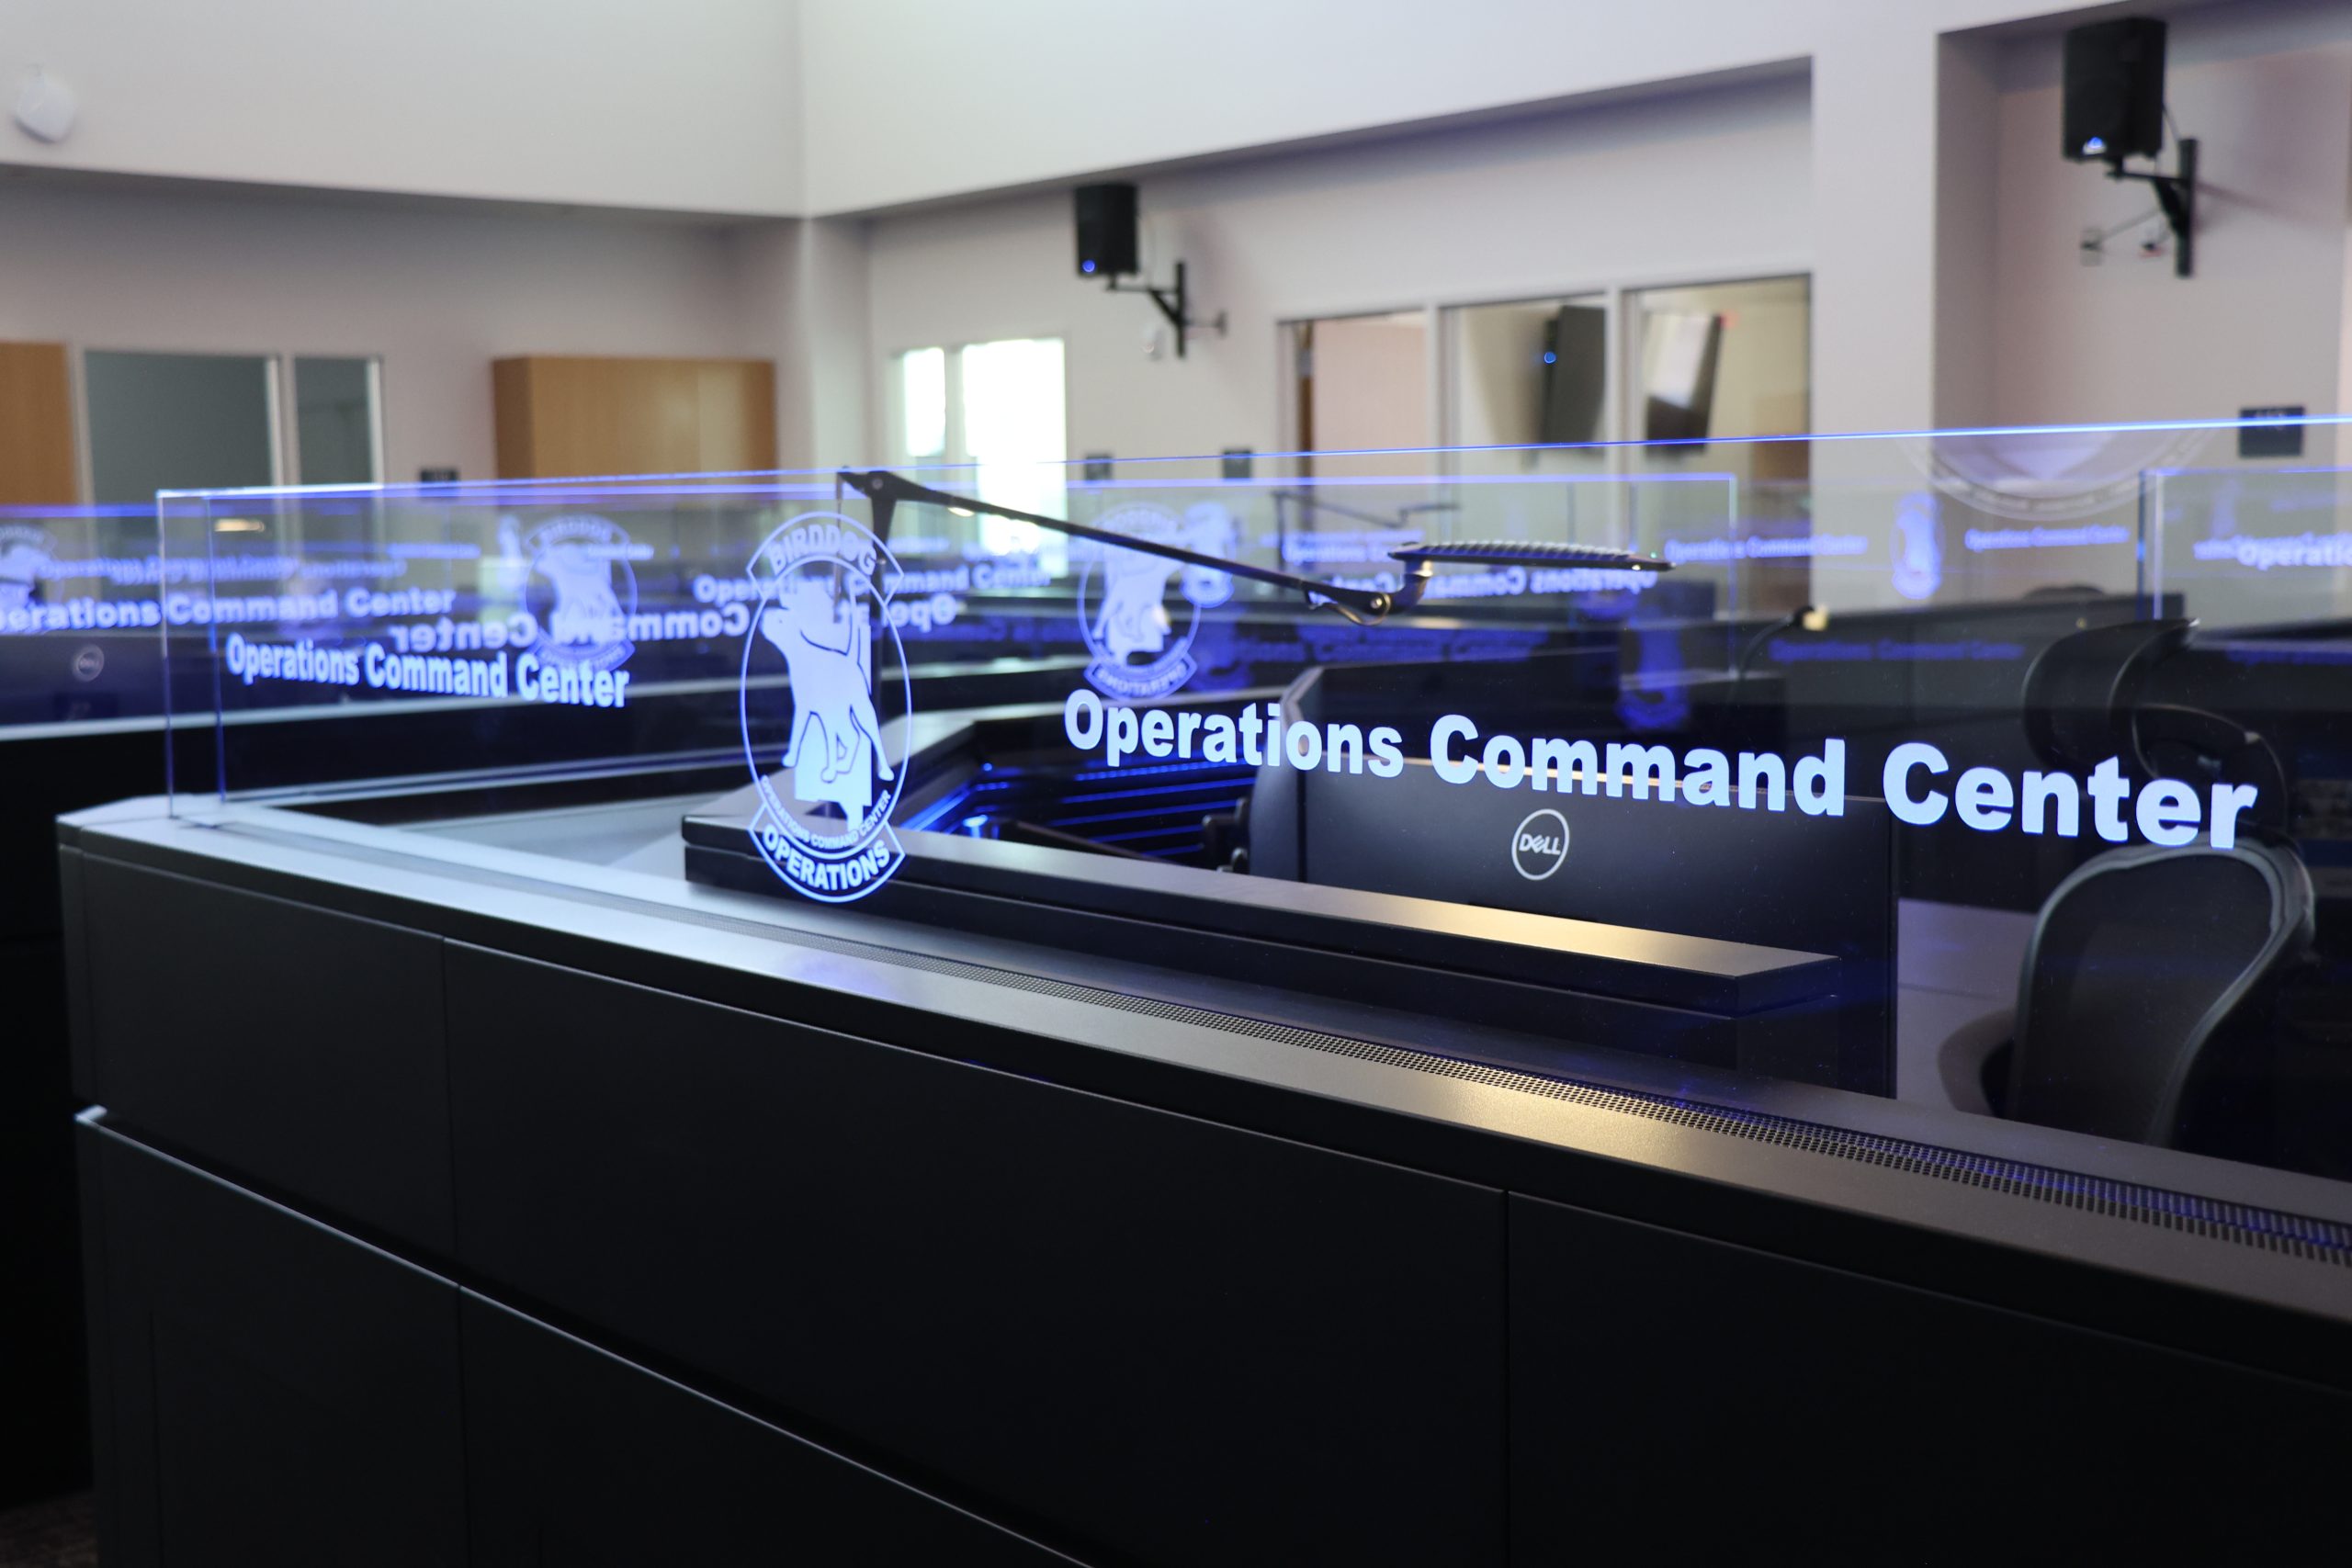 desk with glass and the text "operations command center" is on the glass